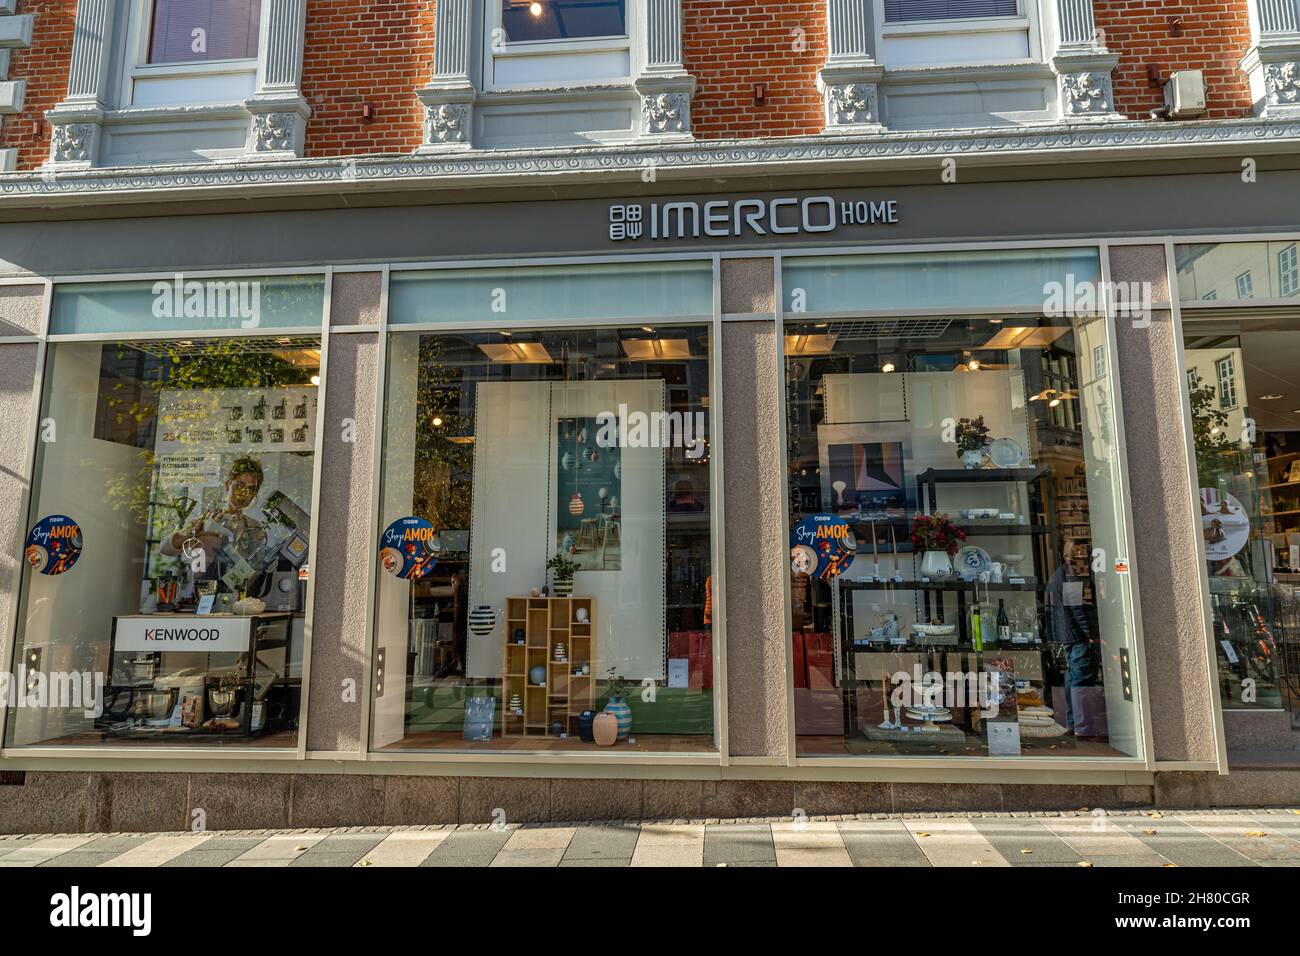 stores hi-res photography and images Alamy